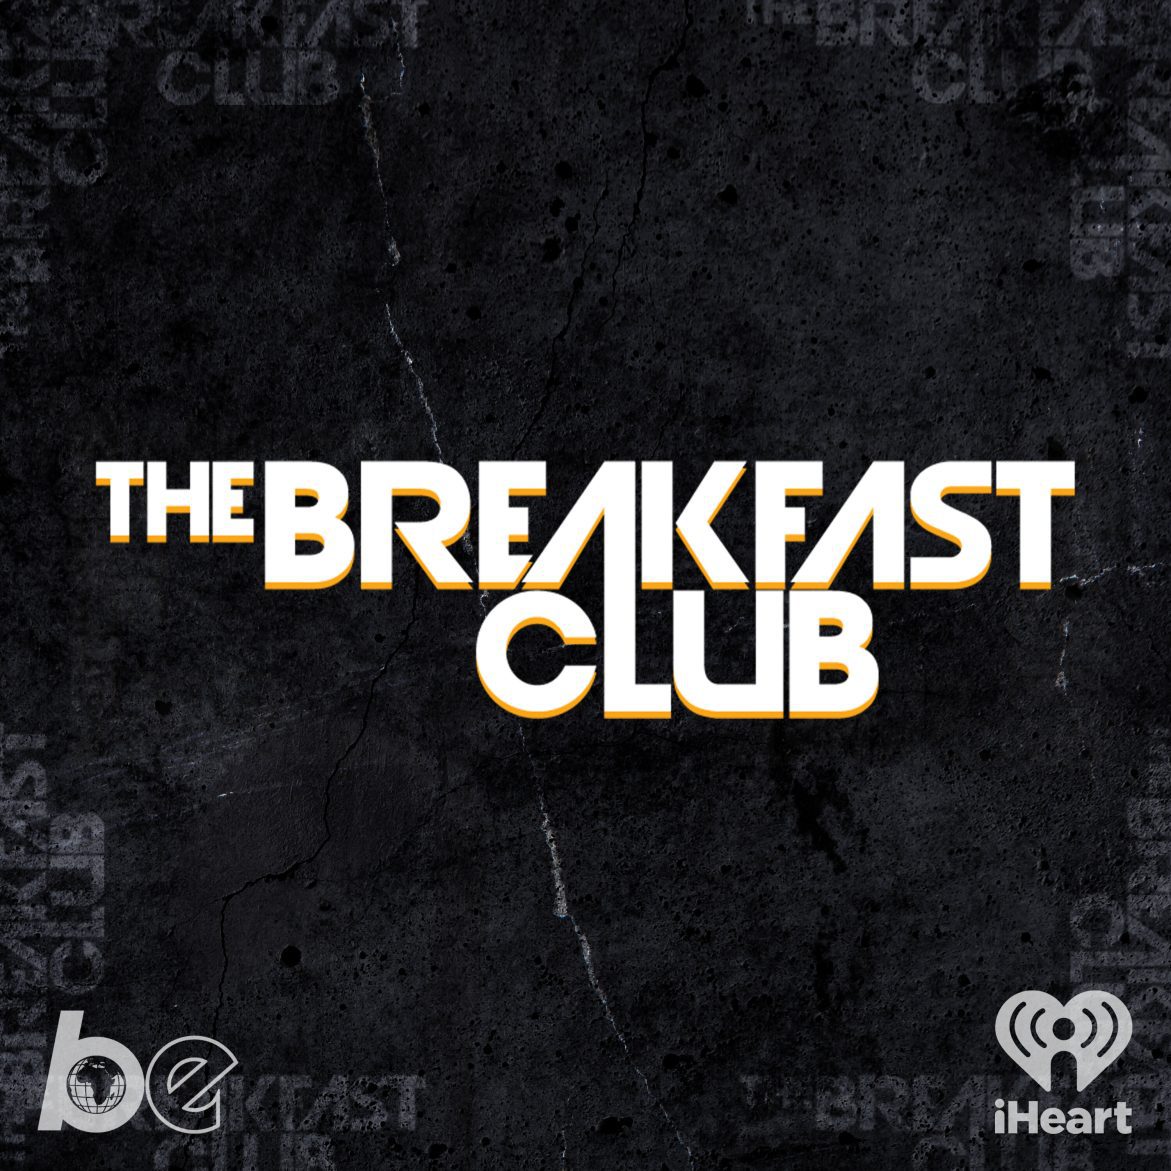 Black Podcasting - The Breakfast Club Best Of Episode(Terrance Crawford Interview, Tony Yayo Interview, Lola Brooke Interview, If A Woman Gives A Compliment Is It Flirting?)